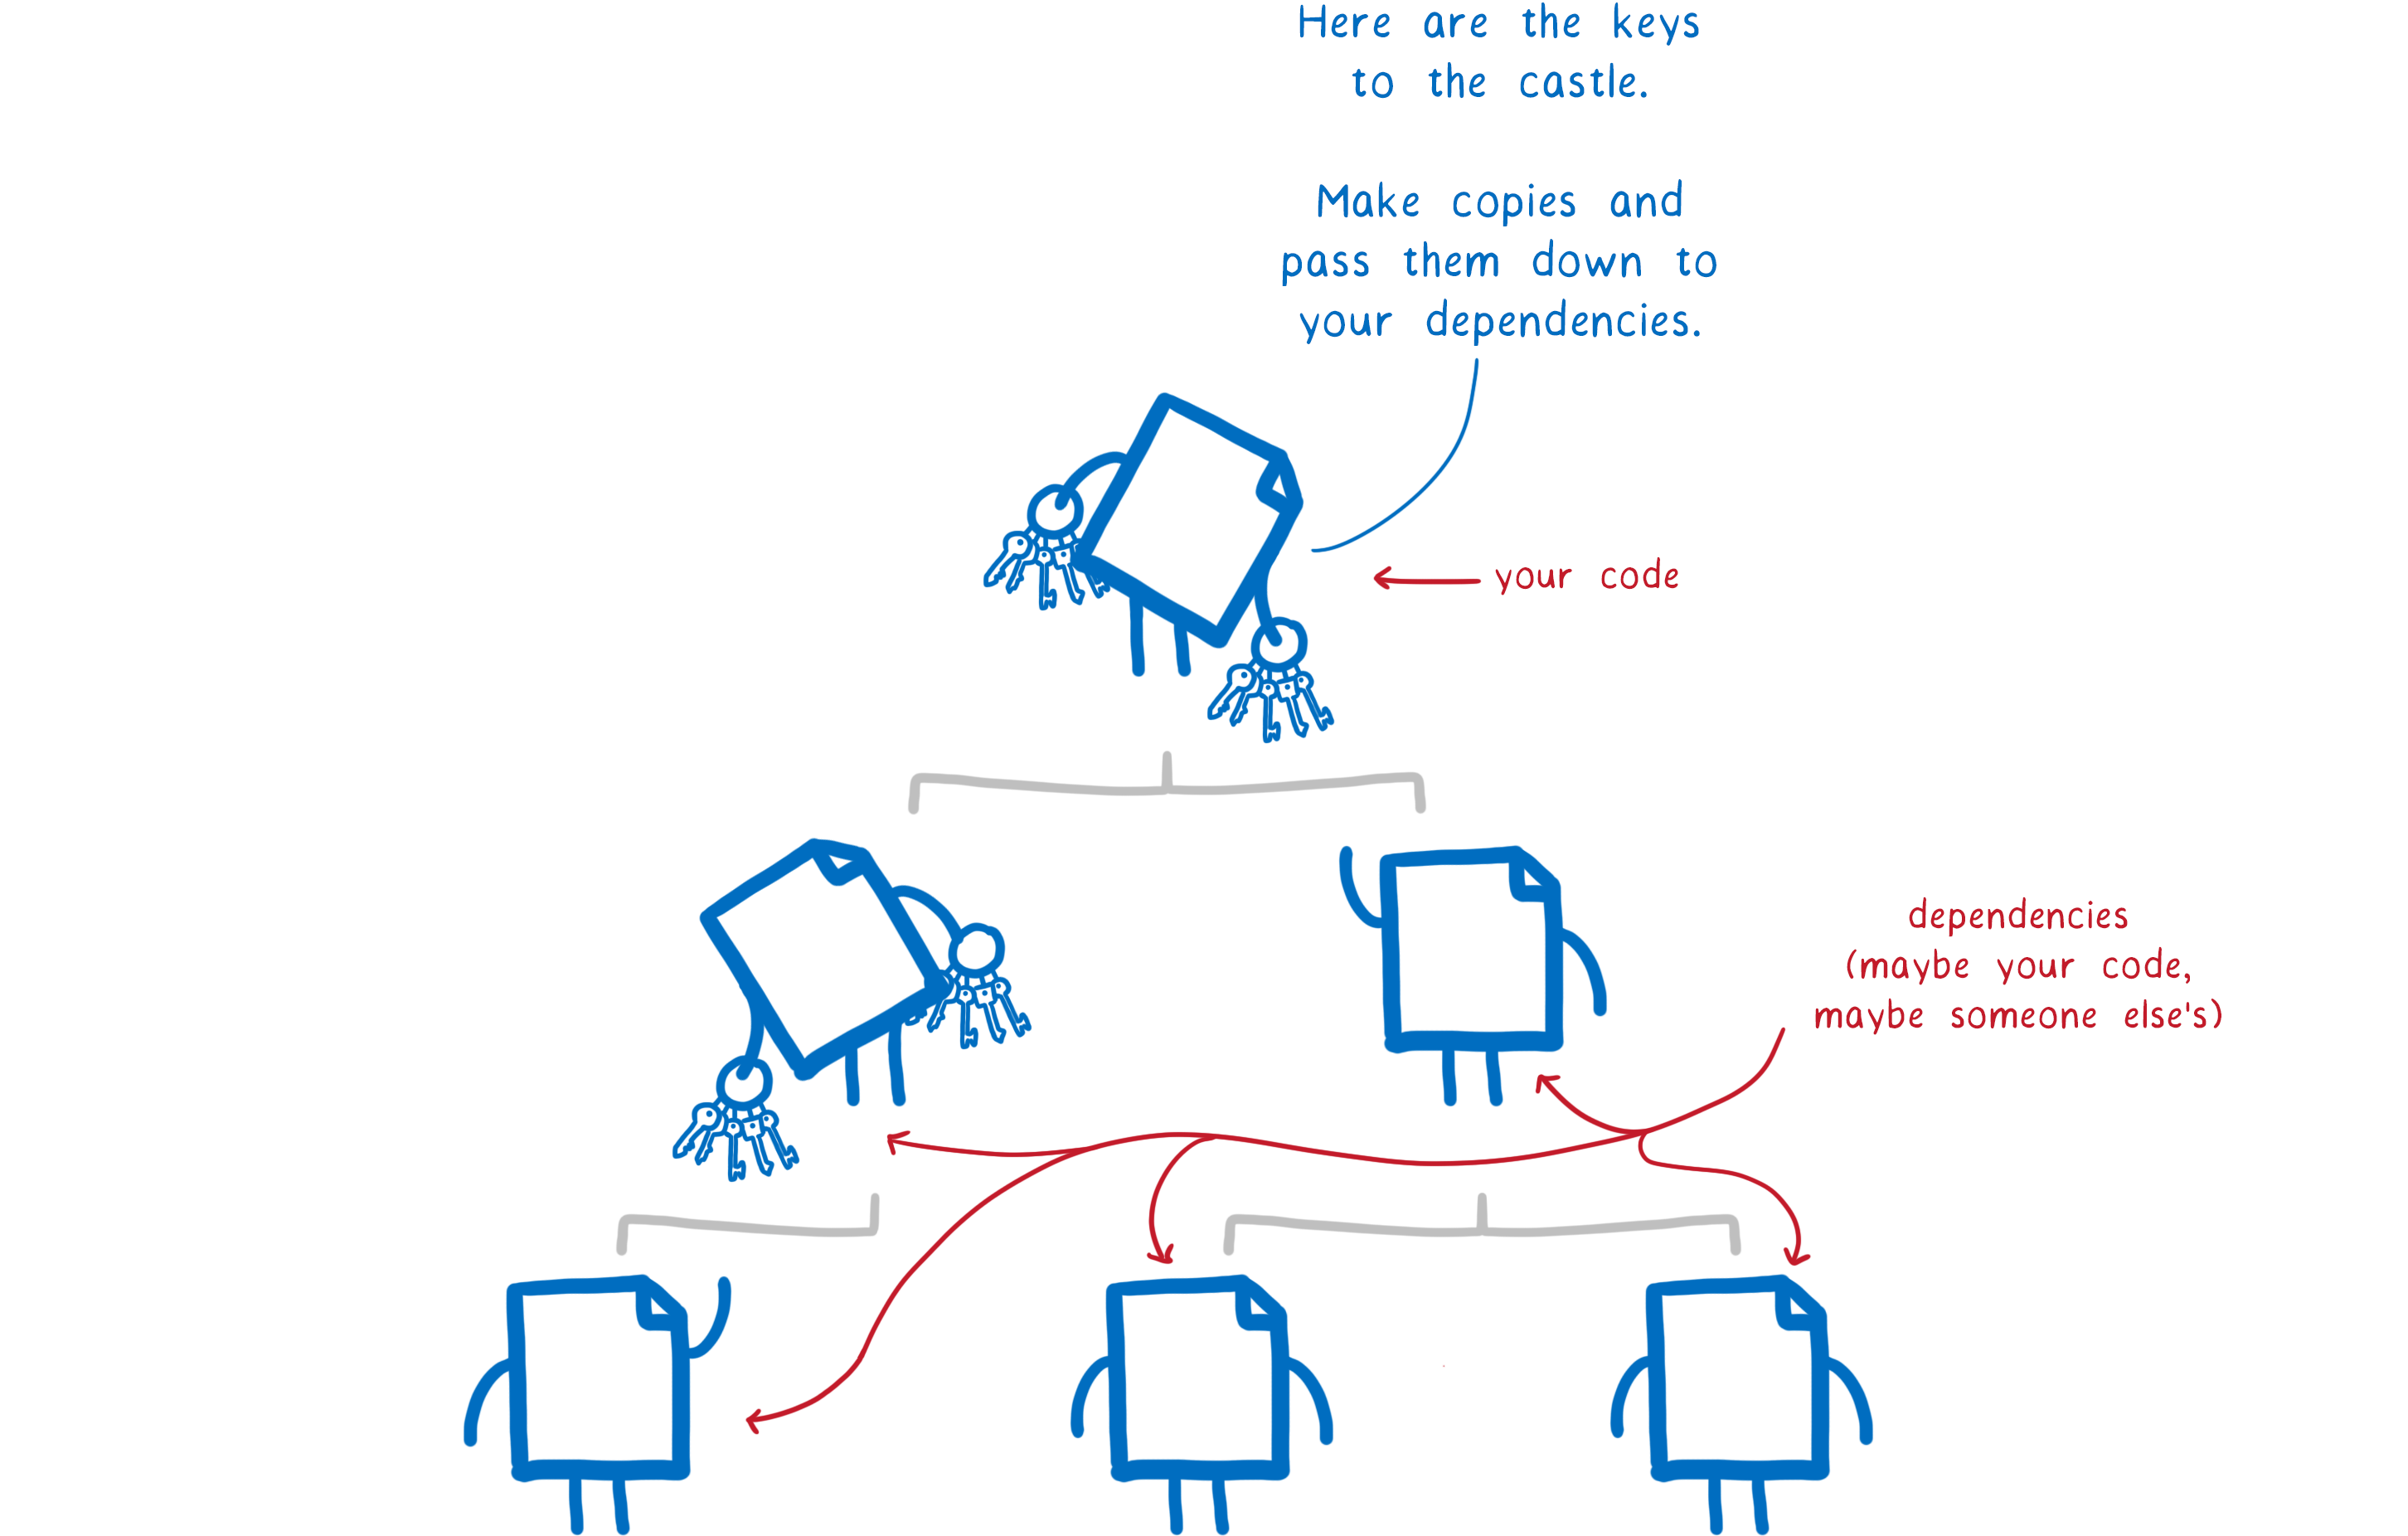 Modules passing keys down the dependency tree